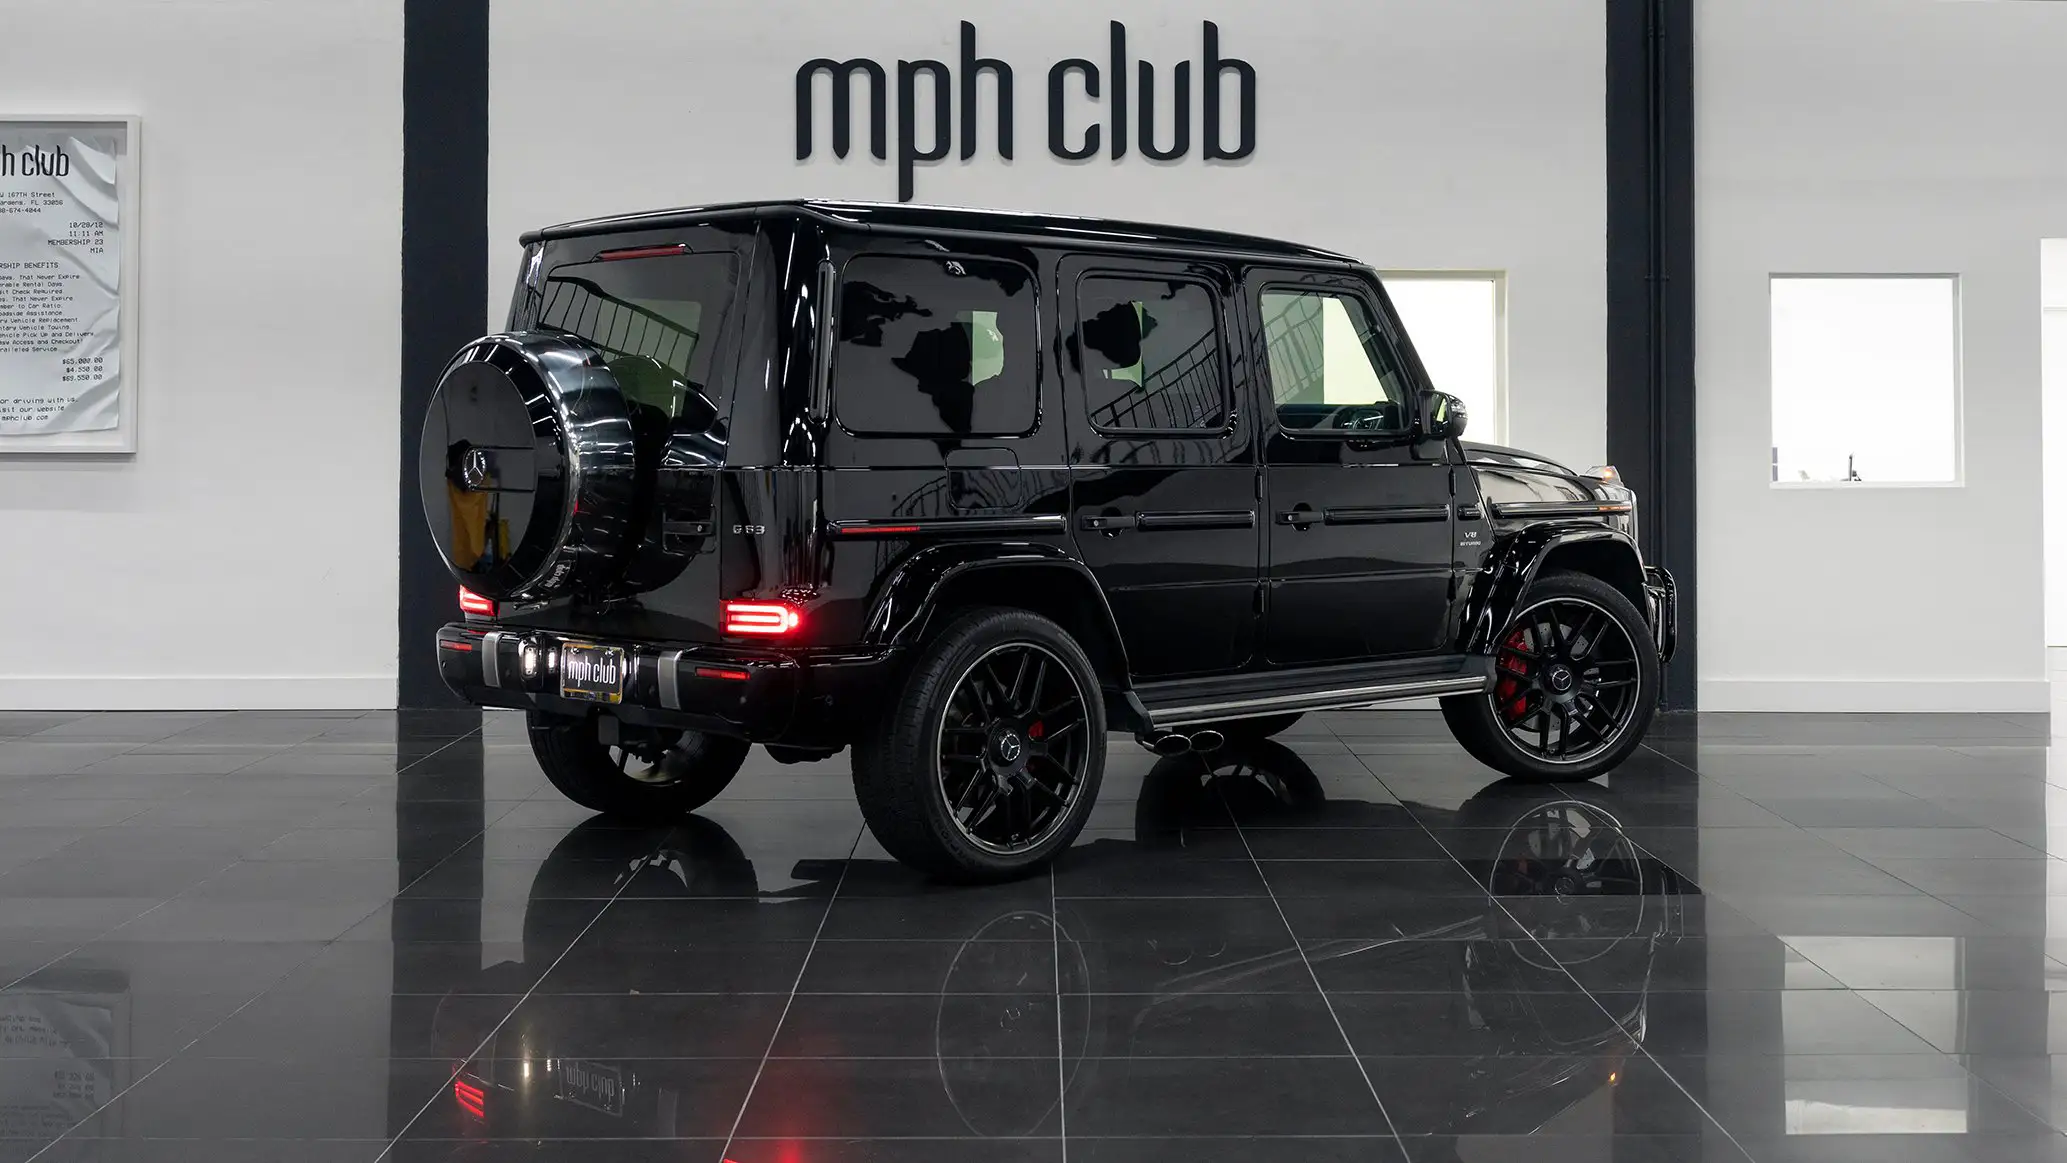 2020 black on white mercedes benz amg g63 for sale mph club 4